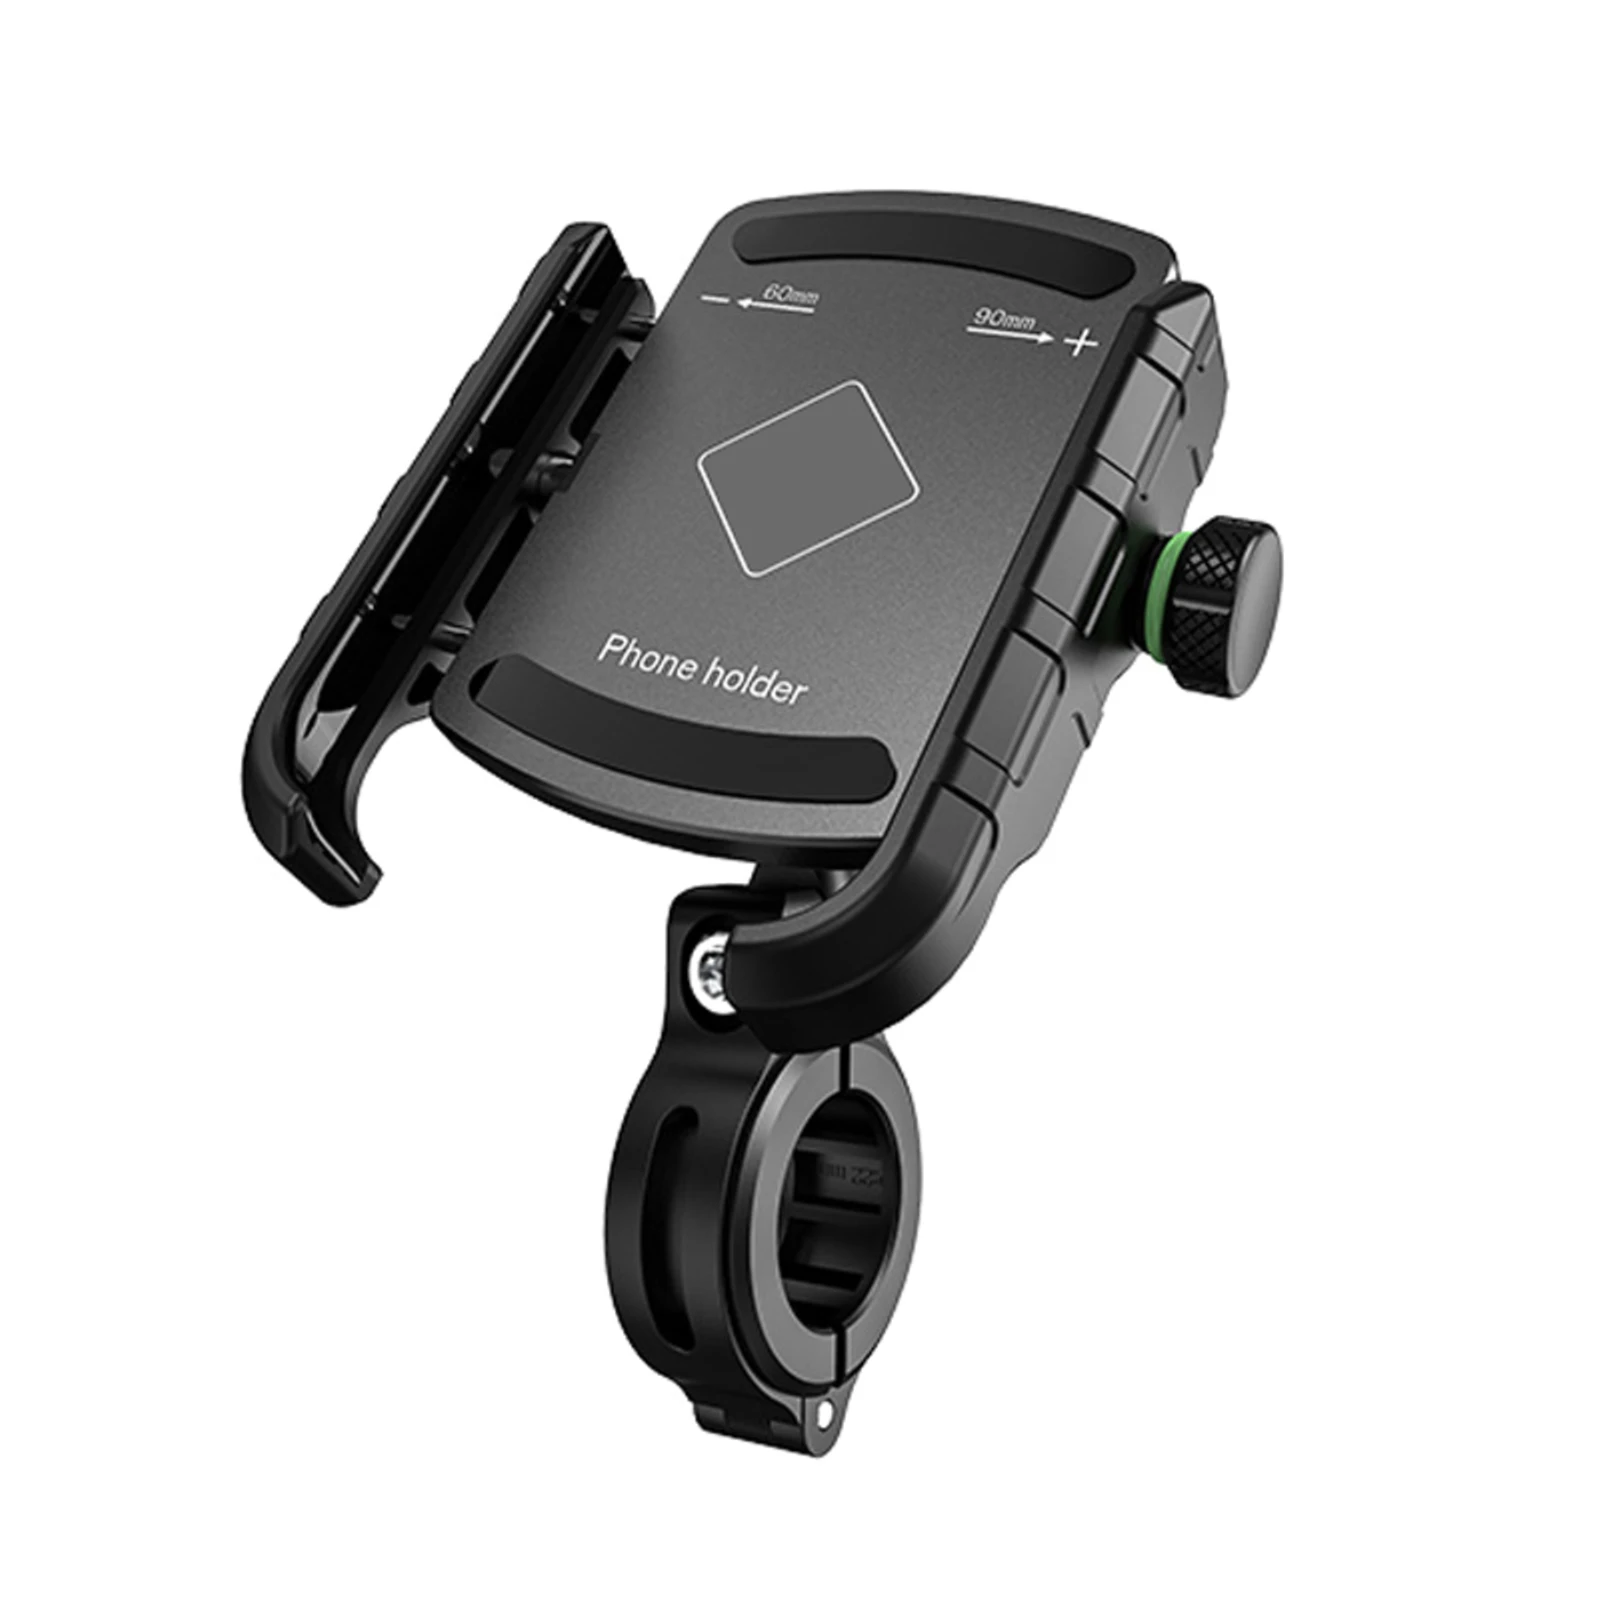 

Universal Motorcycle Bike Phone Holder 360Degree Rotatable Scooters Phone Stand Stable Phone Supporter for iphone Samsung Xiaomi